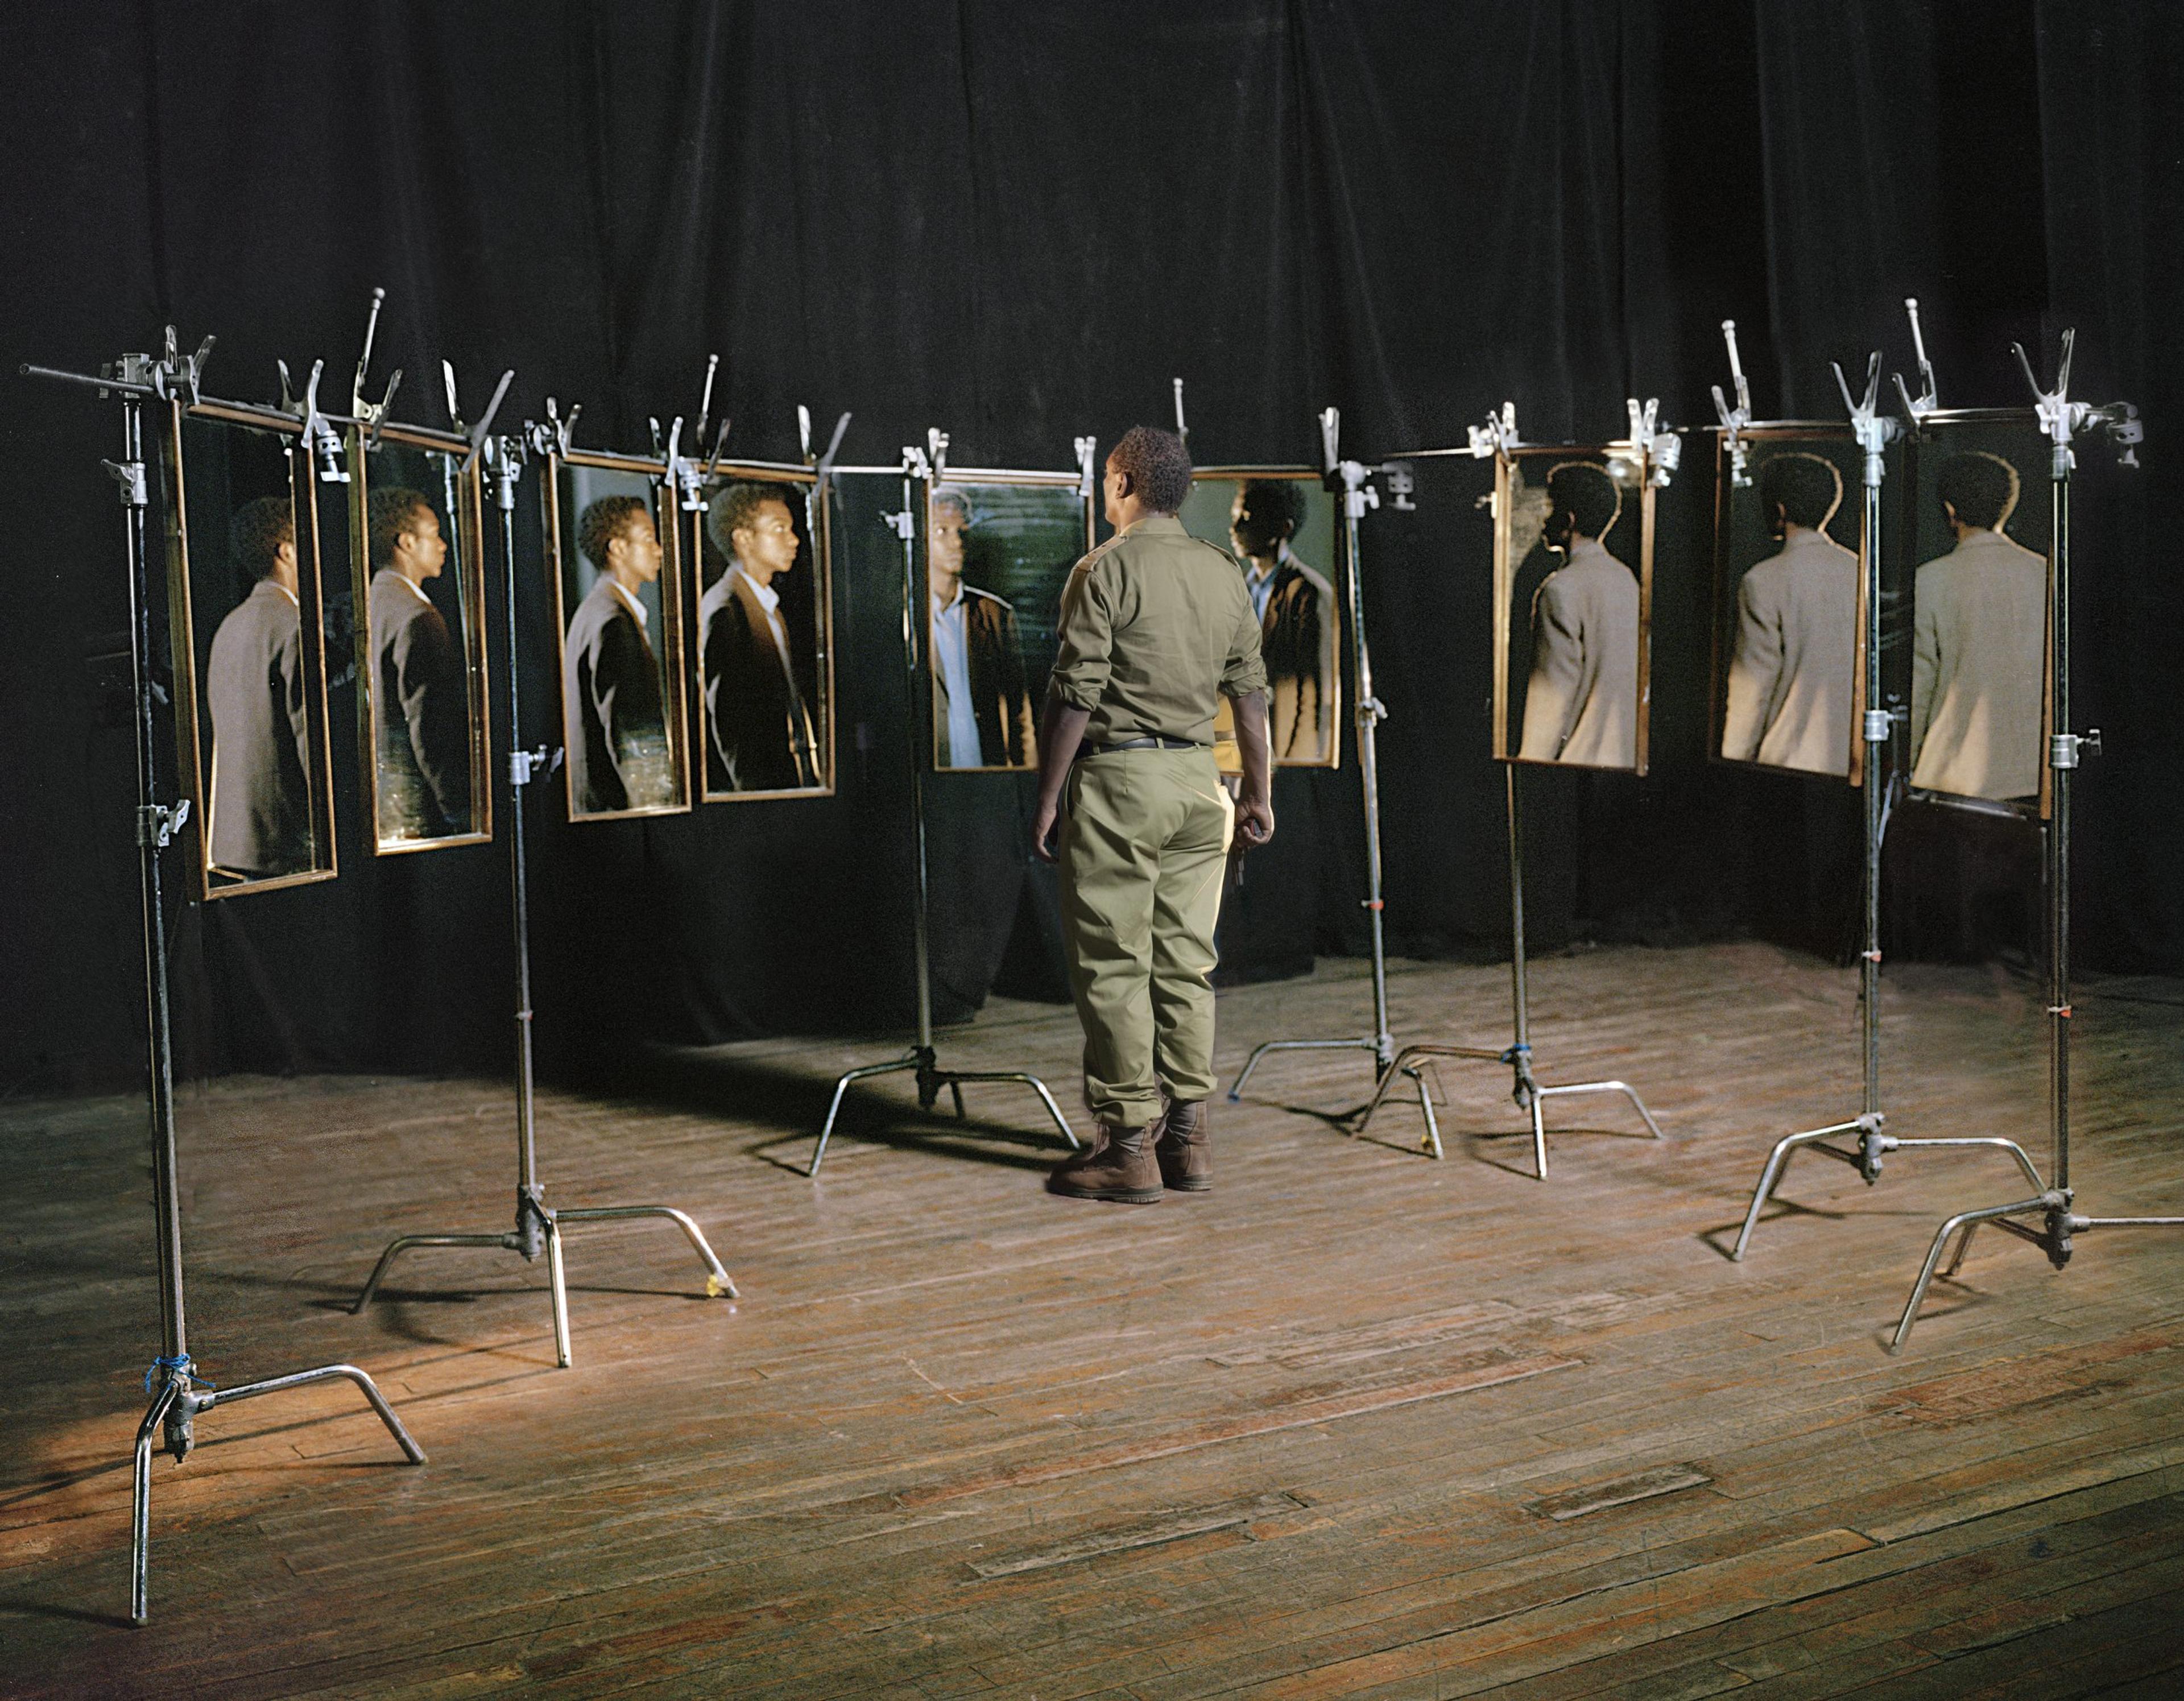 A photograph of a man in military uniform is surrounded by mirrors that reflect back a different man in a brown suit